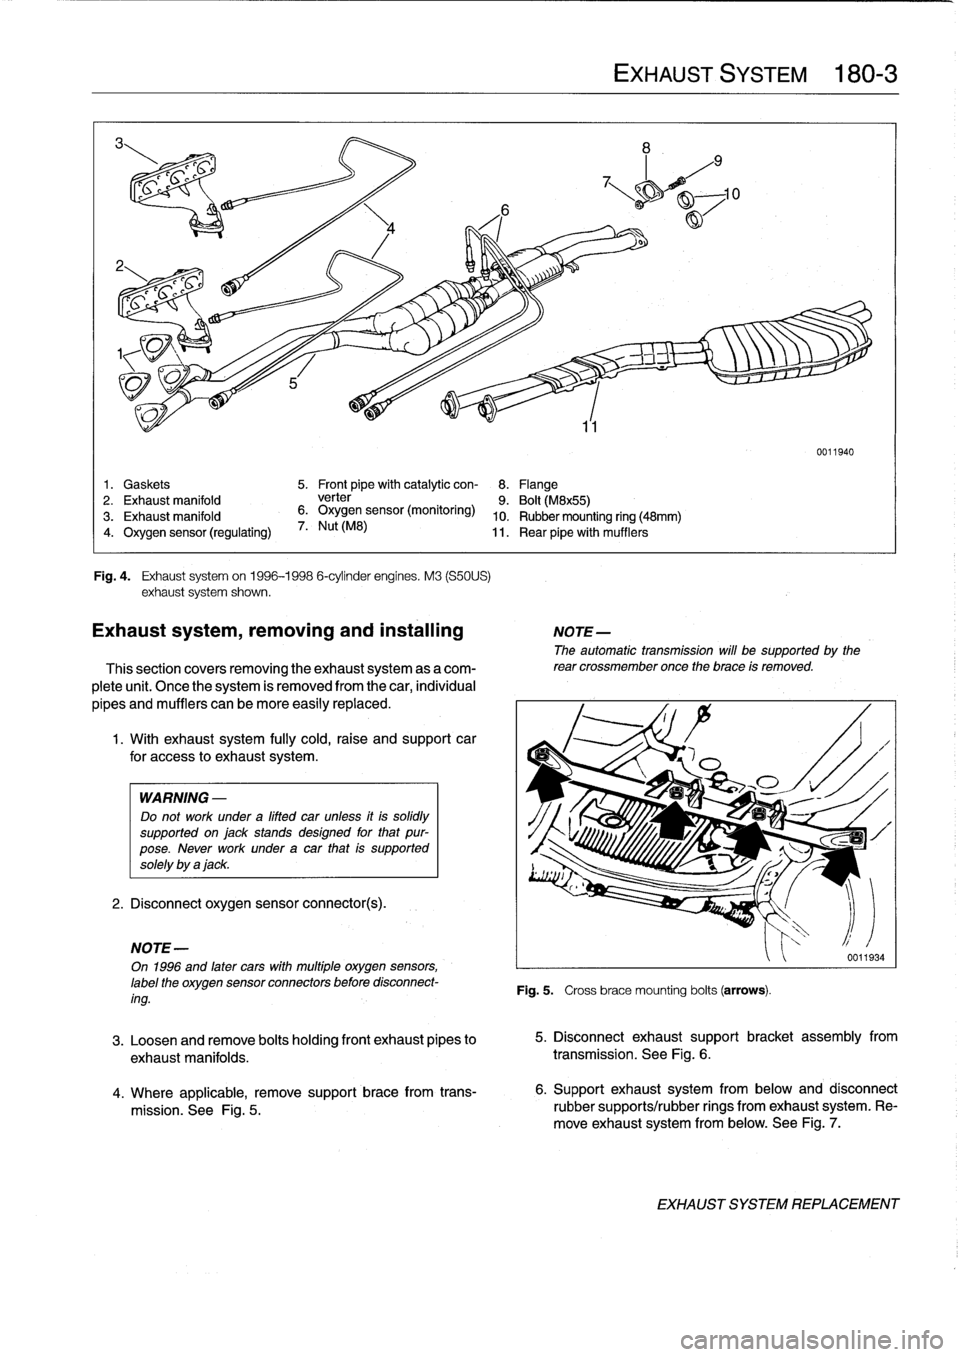 BMW 318i 1997 E36 User Guide 
1
.

	

Gaskets

	

5
.

	

Front
pipe
with
catalytic
con-

	

8
.

	

Flange
2
.

	

Exhaust
manifold

	

verter

	

9
.

	

Bolt
(M8x55)

3
.
Exhaust
manifold

	

6
.
Oxygen
sensor
(monitoring)

	
